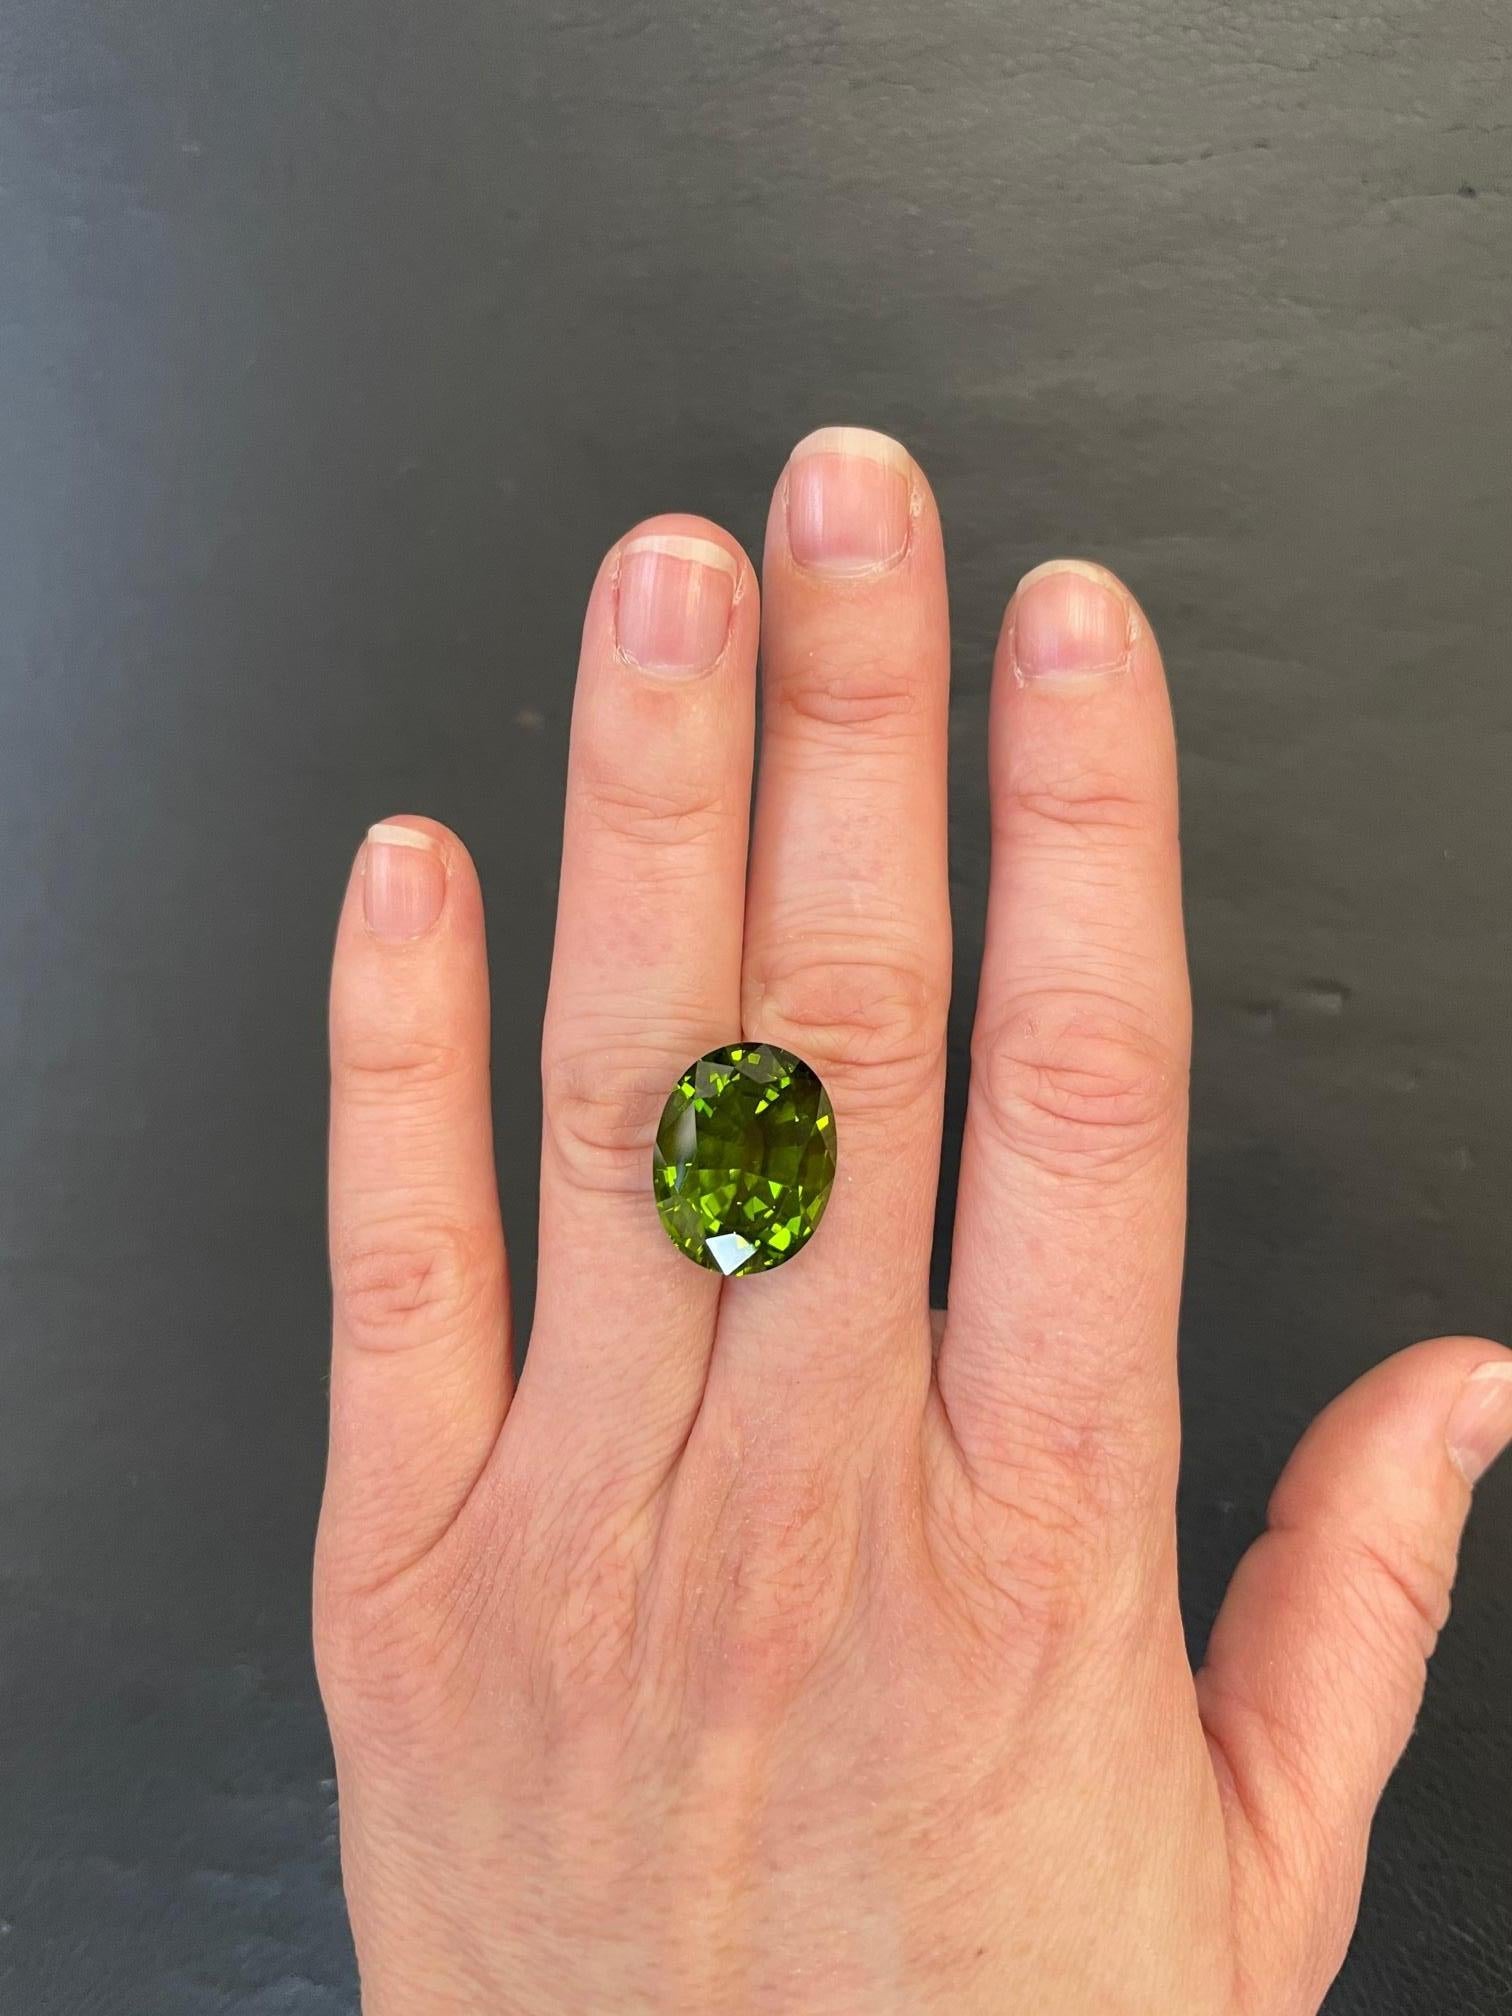 Exceptional 18.96 carat oval Peridot gem, offered loose to a fine gemstone collector.
Dimensions: 18.5 x 14.6 x 10.2 mm.
Returns are accepted and paid by us within 7 days of delivery.
We offer supreme custom jewelry work upon request. Please contact